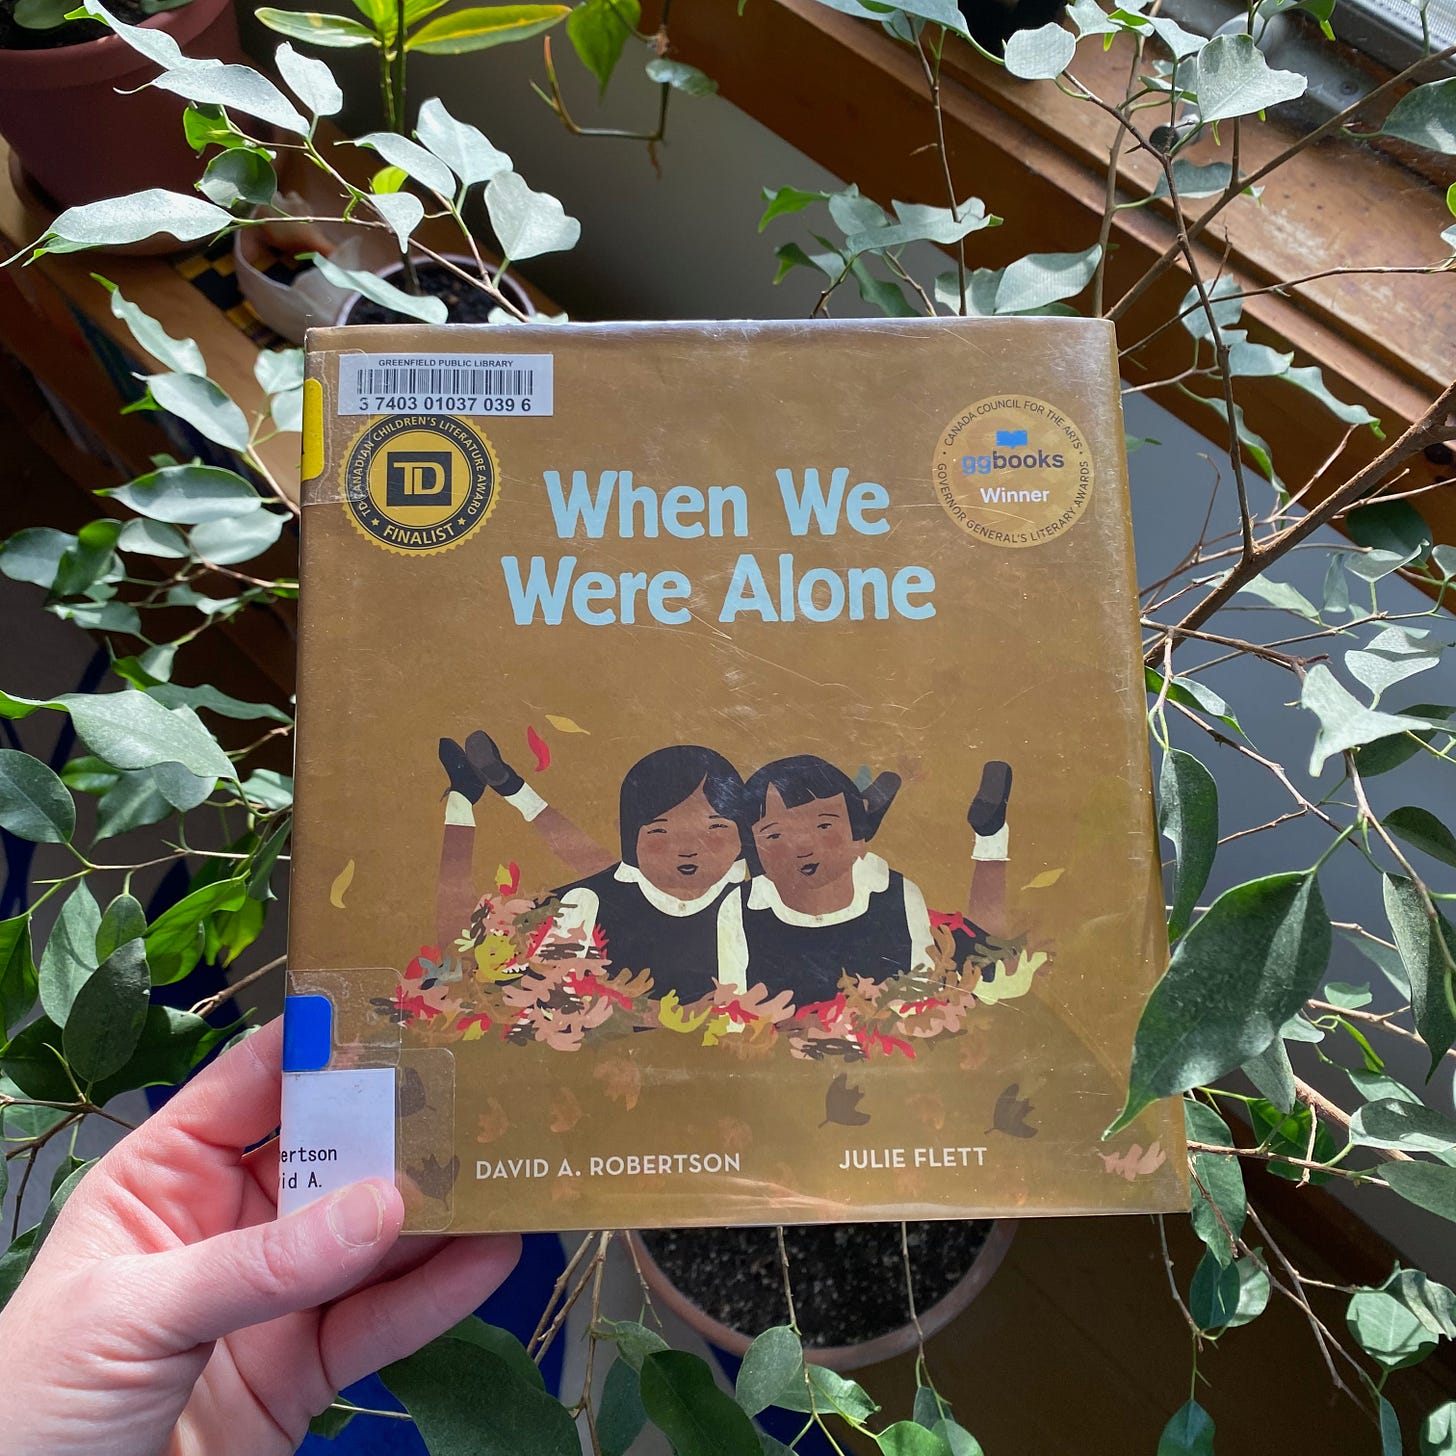 I’m holding this book among the leaves of a ficus tree under a window.